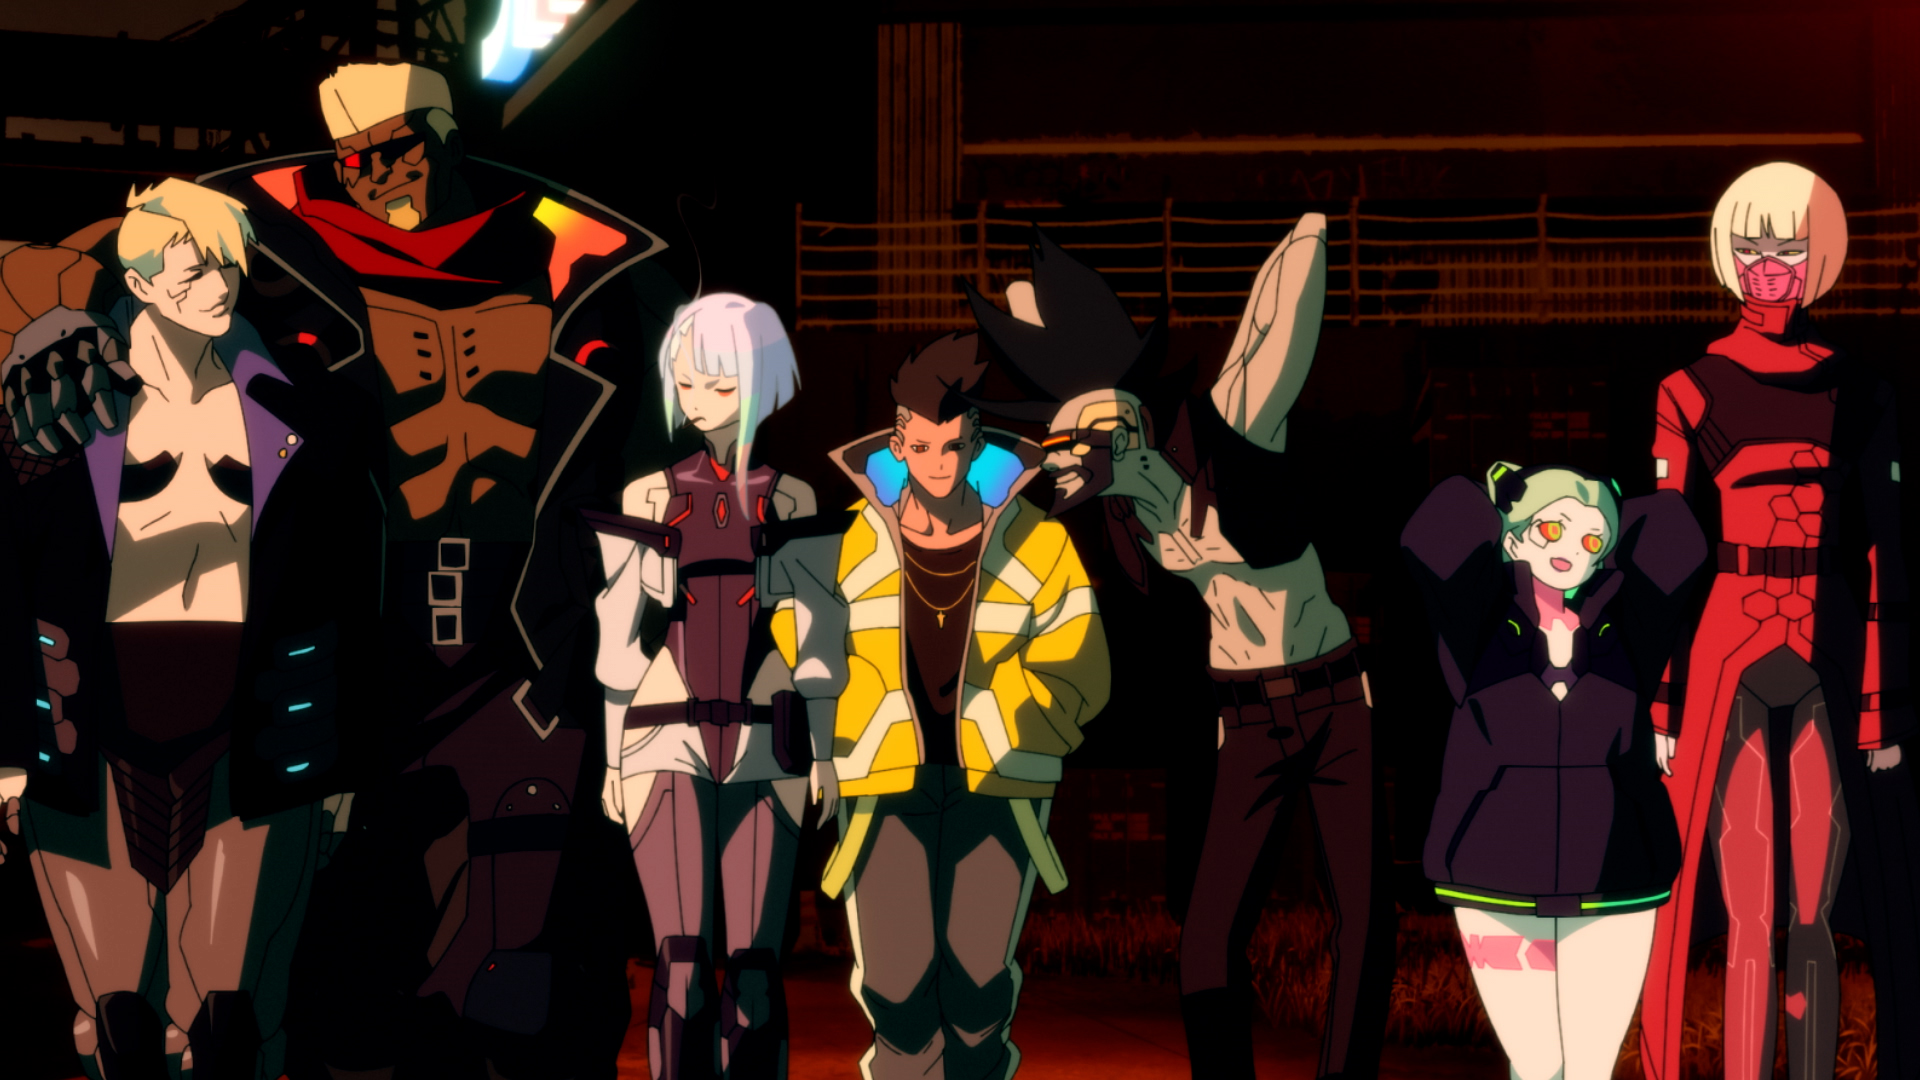 The main characters in Cyberpunk: Edgerunners walk in a line towards the camera